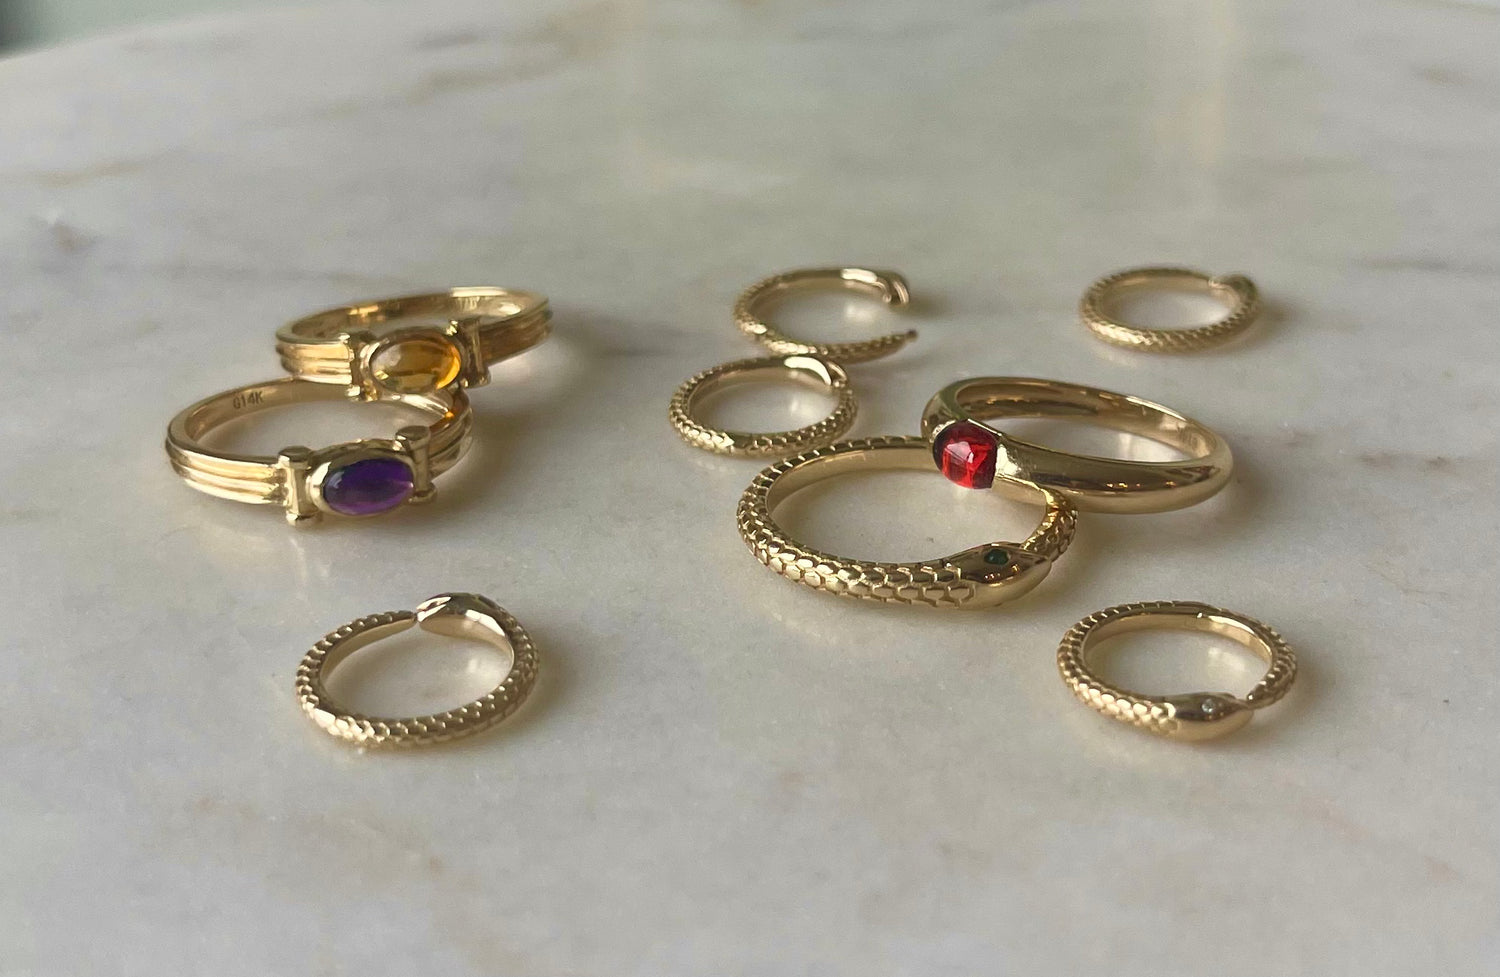 About Golden Hour Jewelry